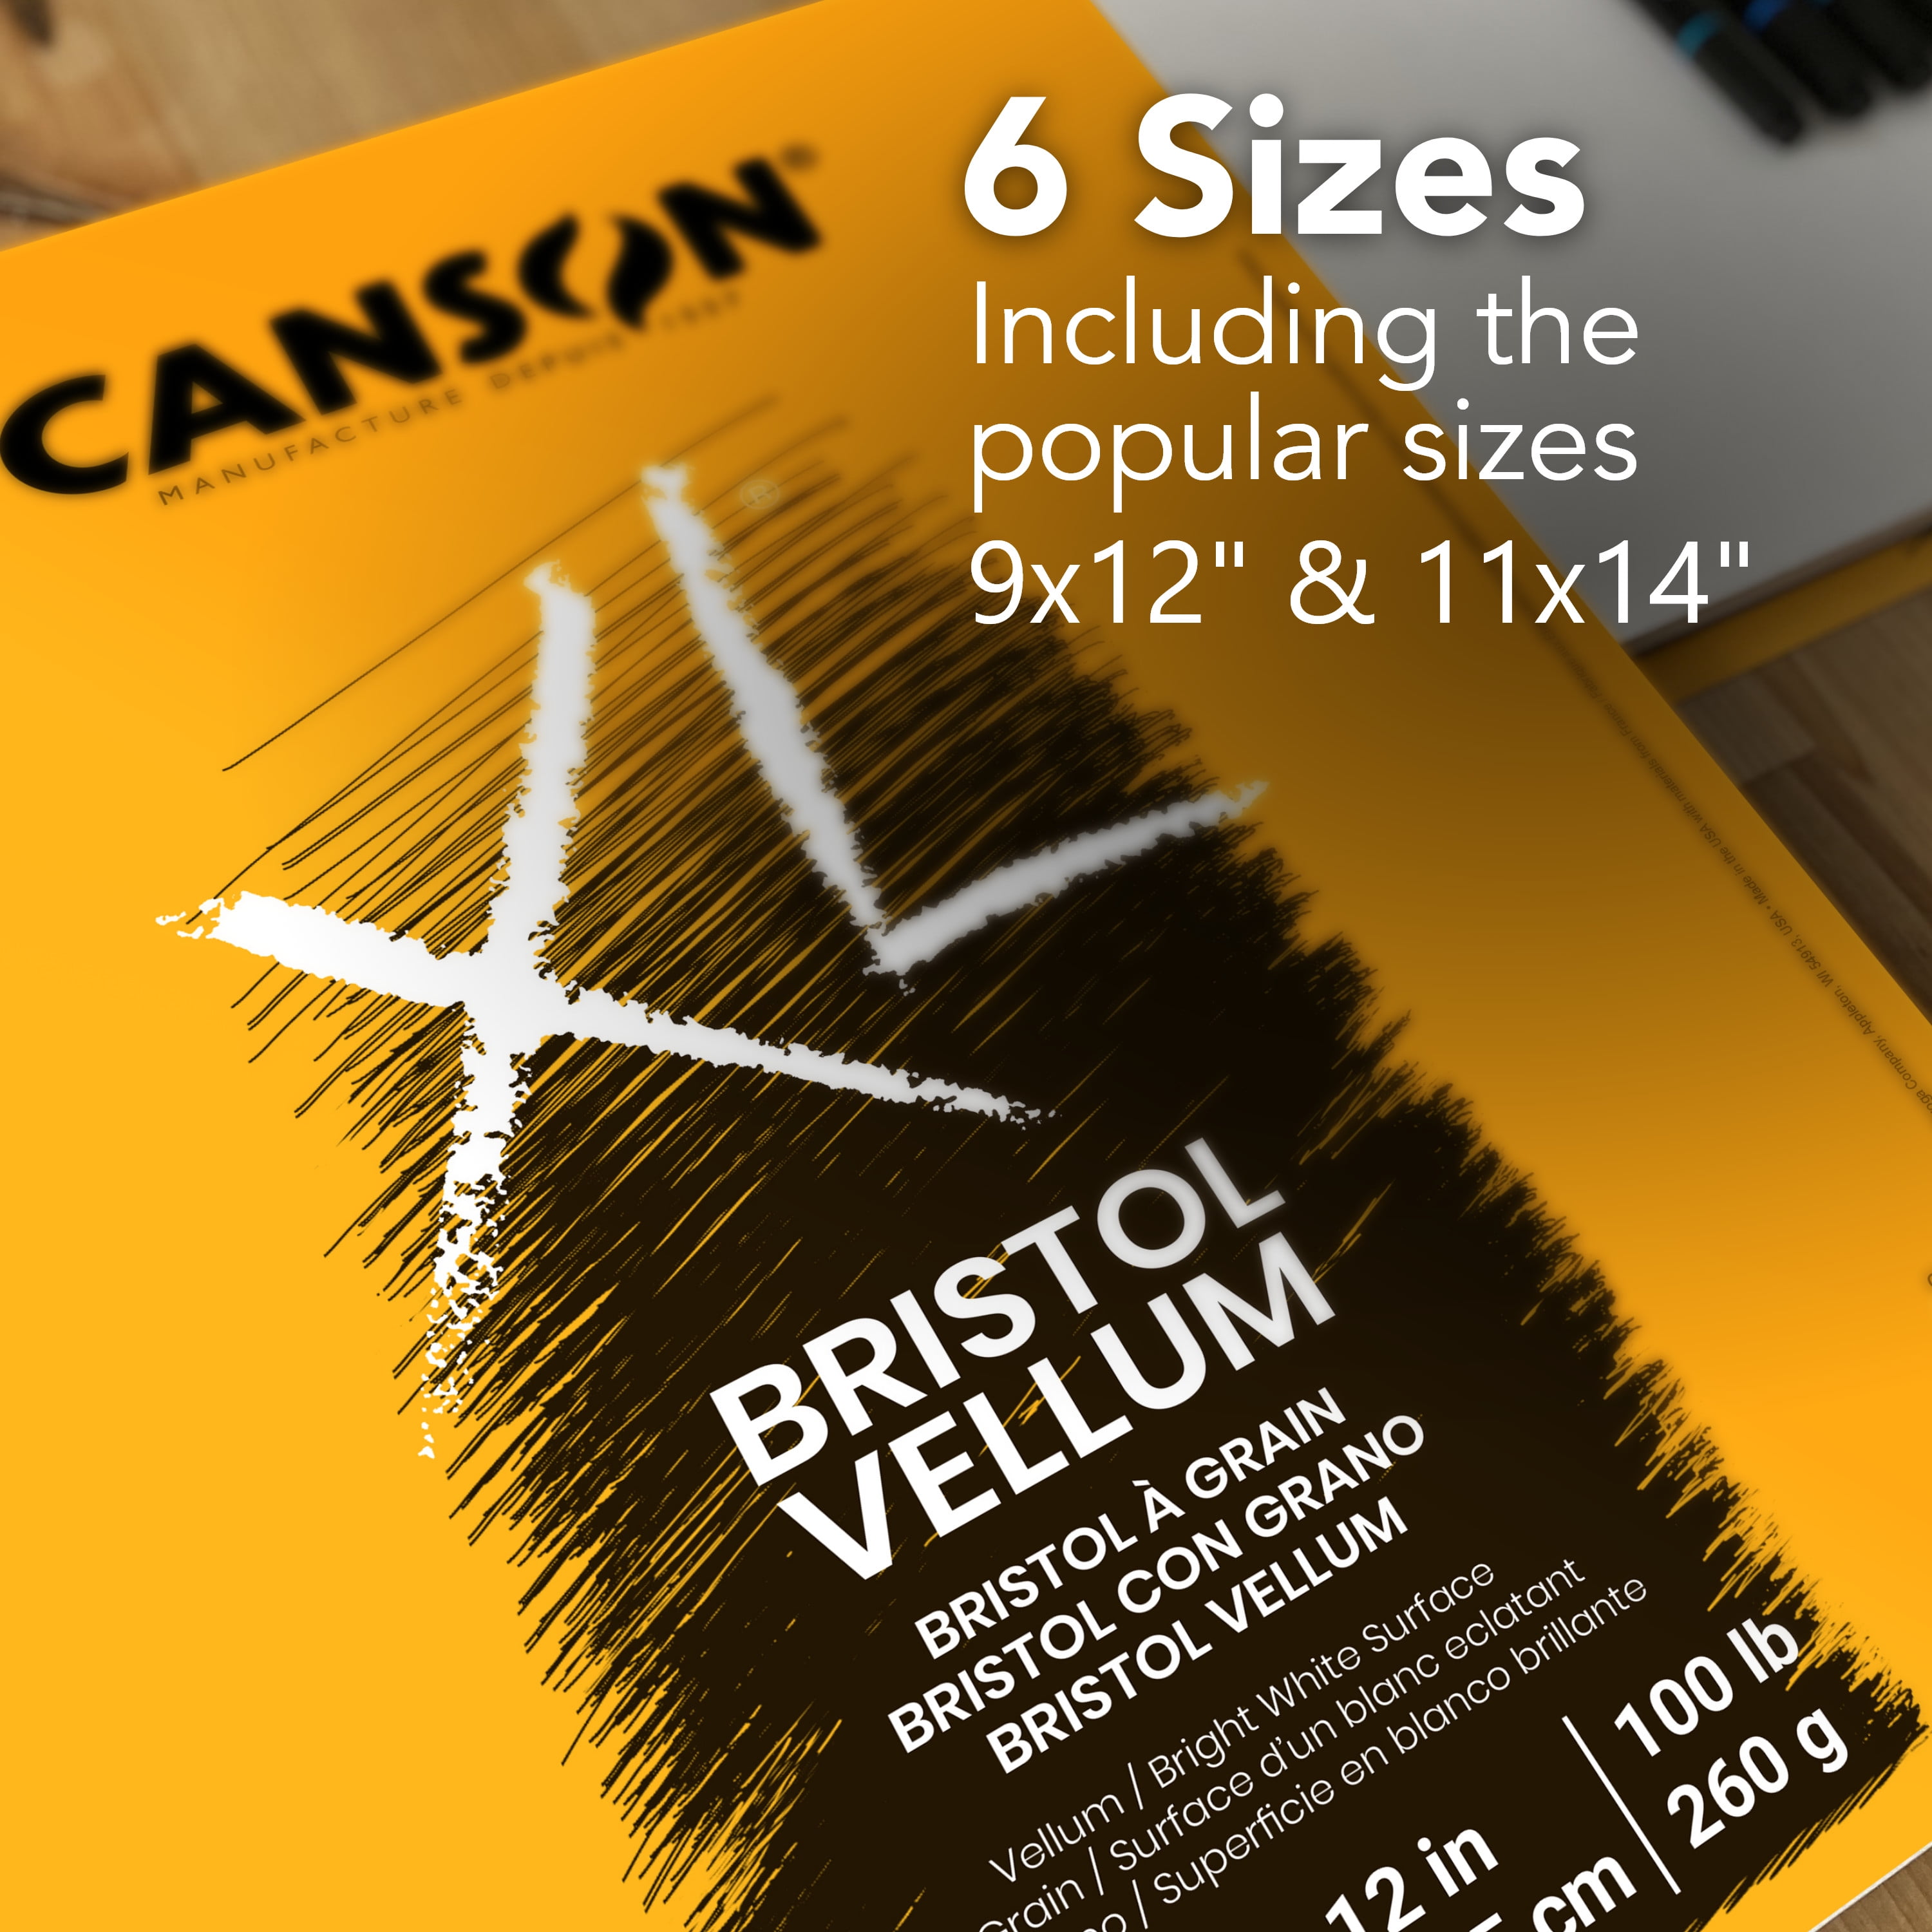 18x24 Canson Smooth 2 Ply Bristol Paper